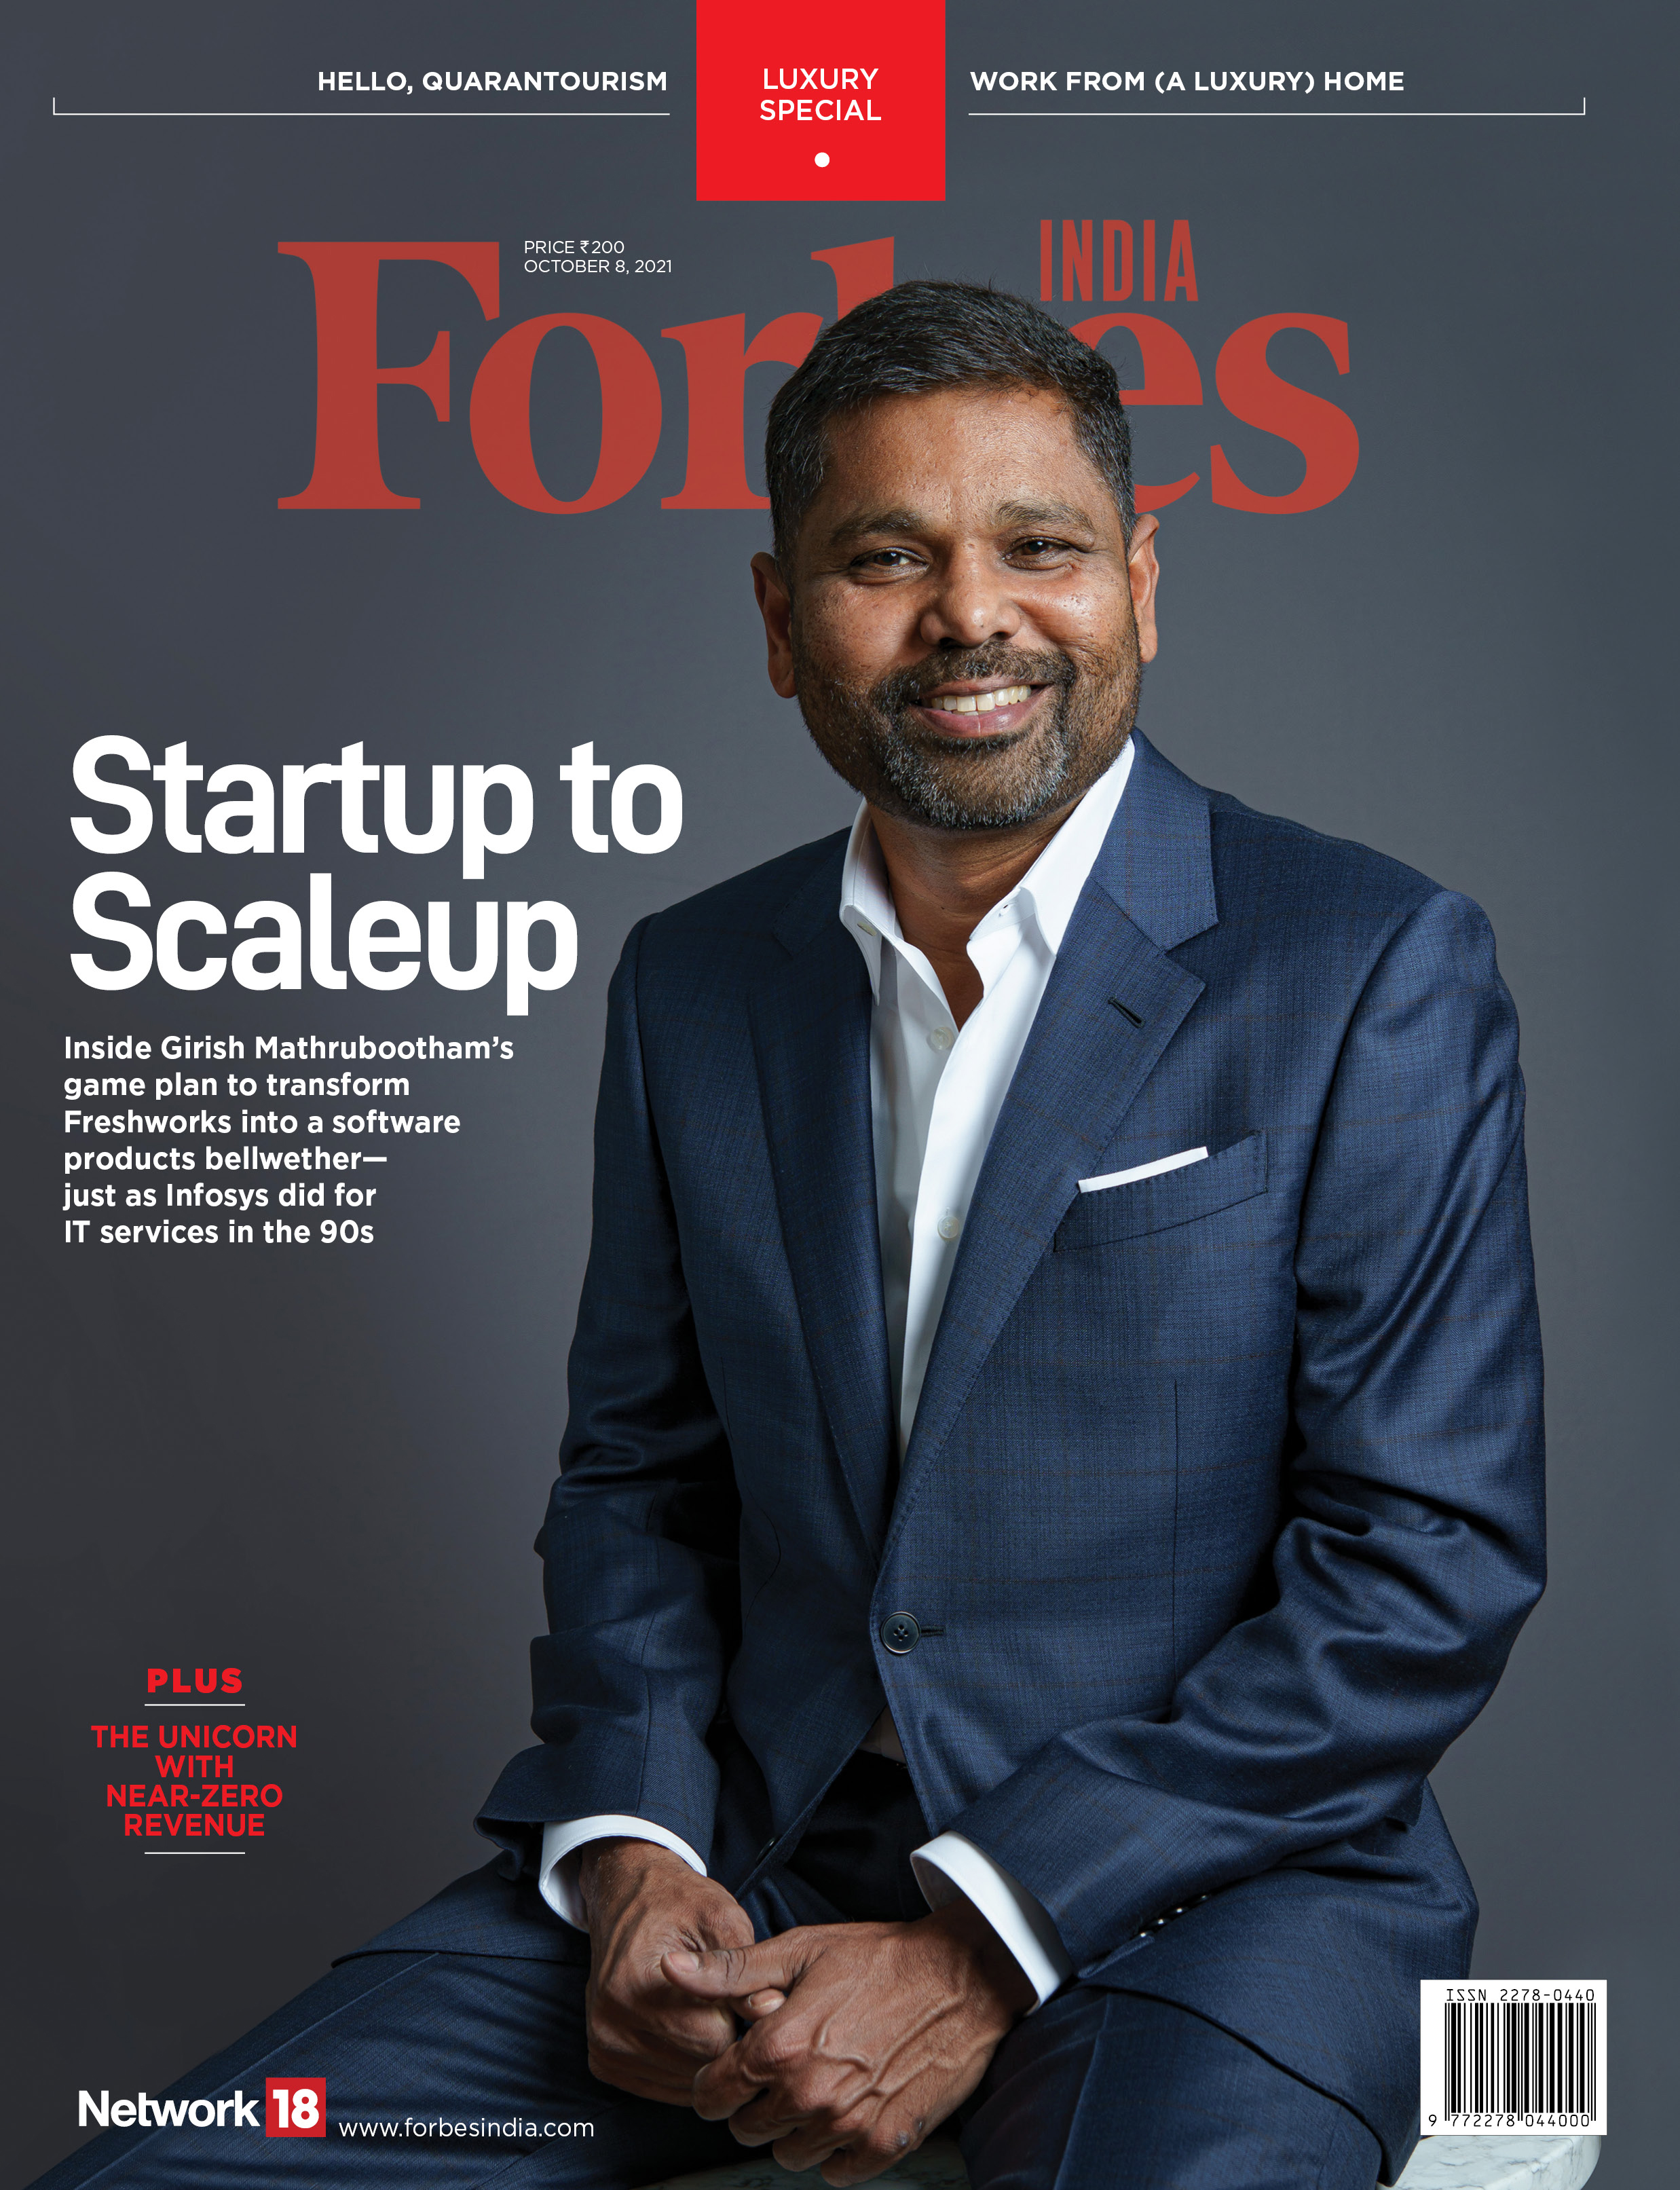 Forbes India 2021 Rewind: Our best covers of the year